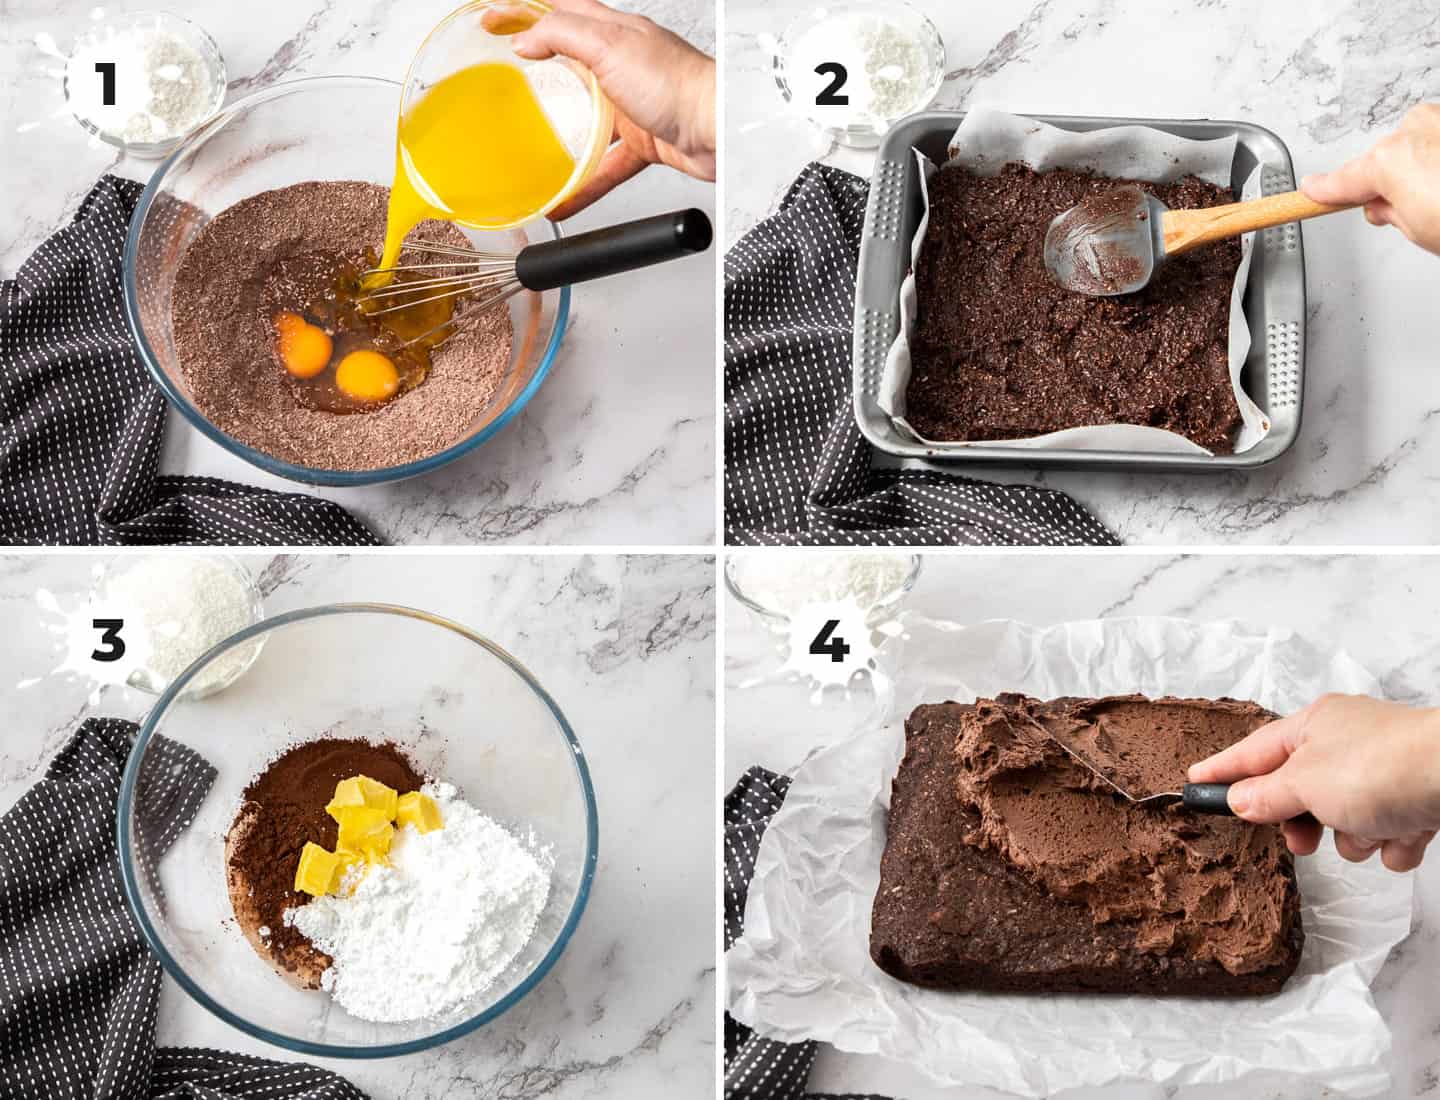 A collage of 4 images showing how to make the chocolate fudge slice.